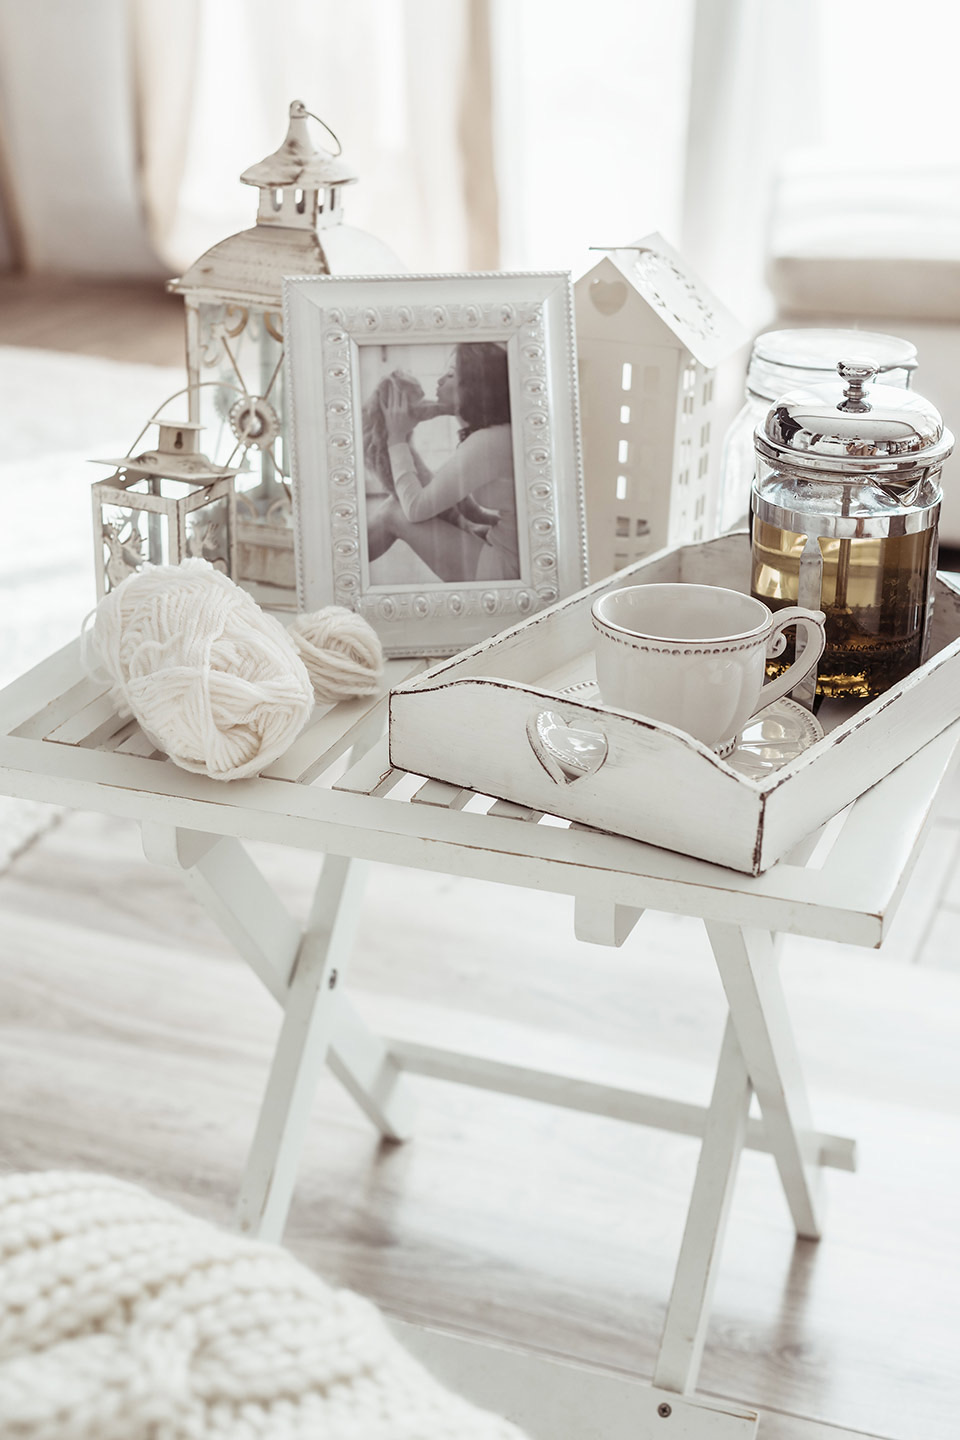 Accessoires in shabby chic stijl